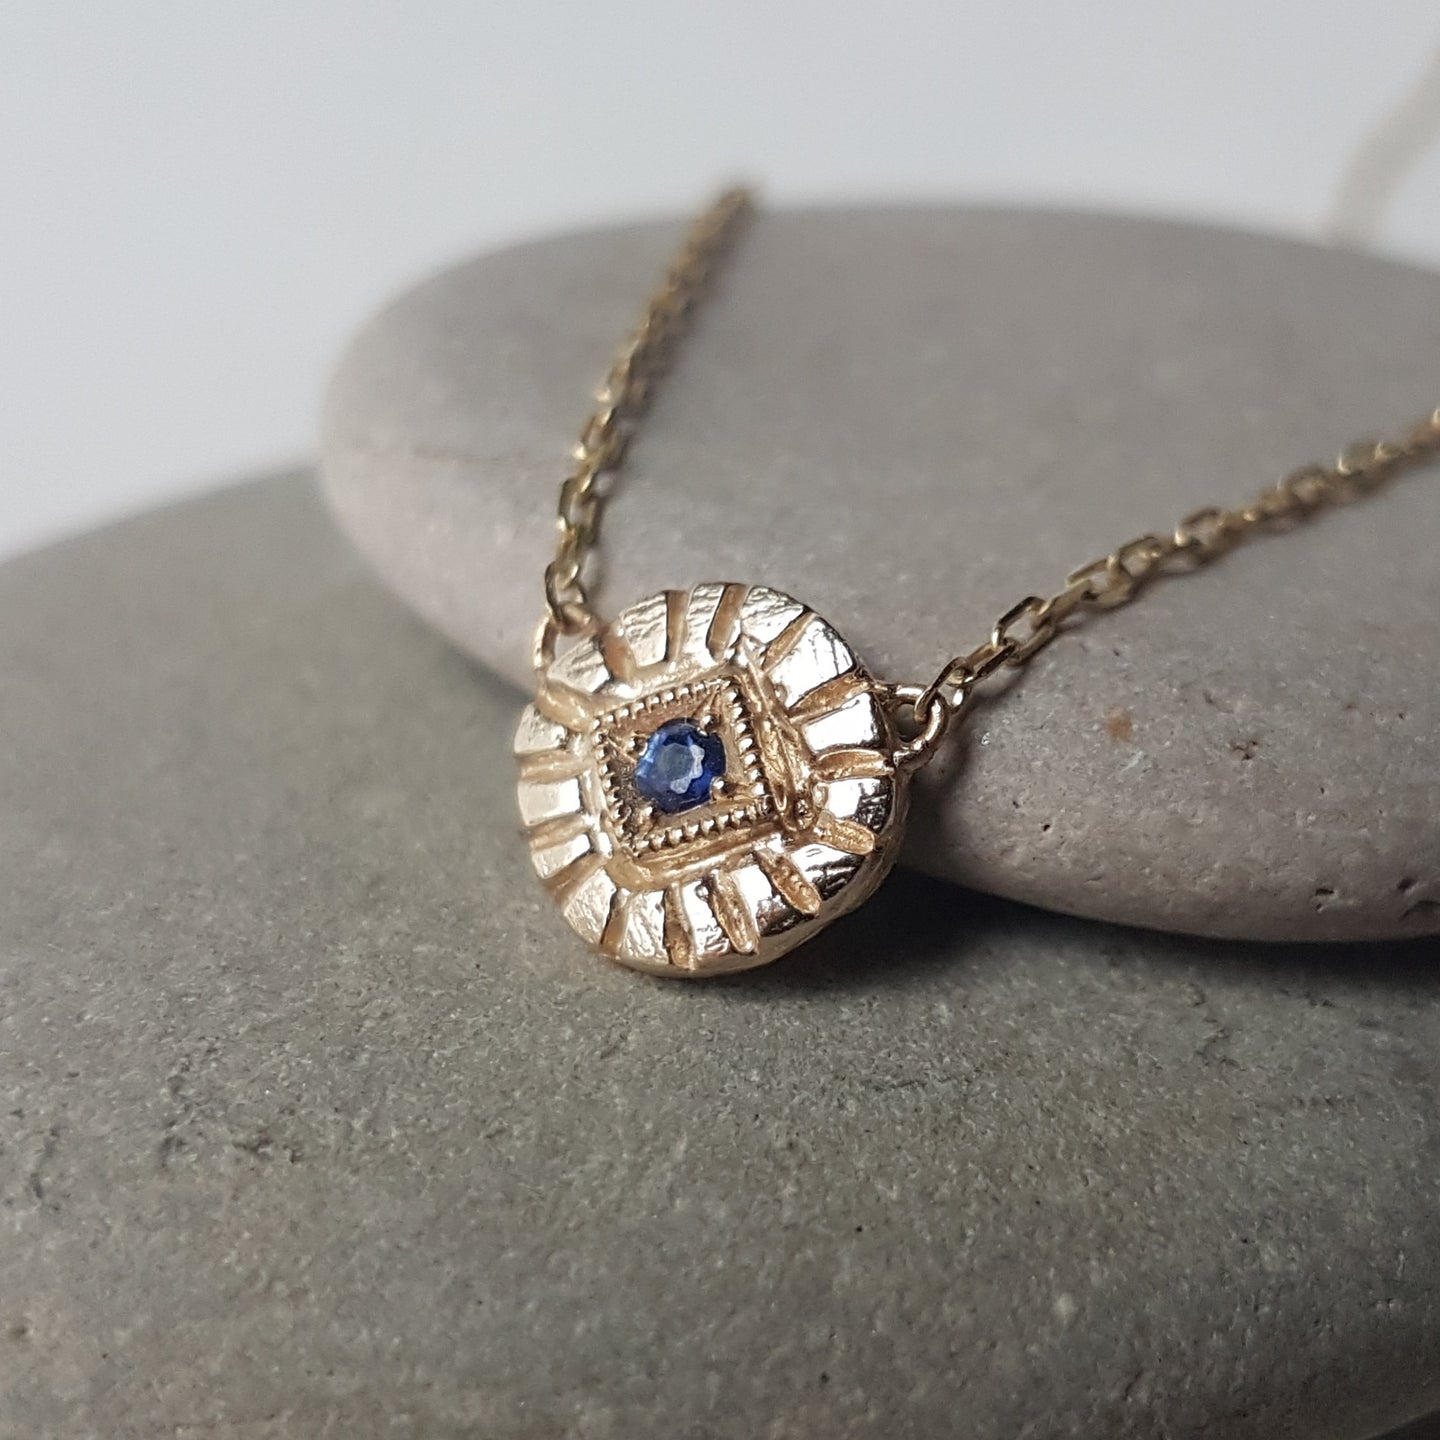 Mystic Eye Necklace in Blue Sapphire and 10k Yellow Gold